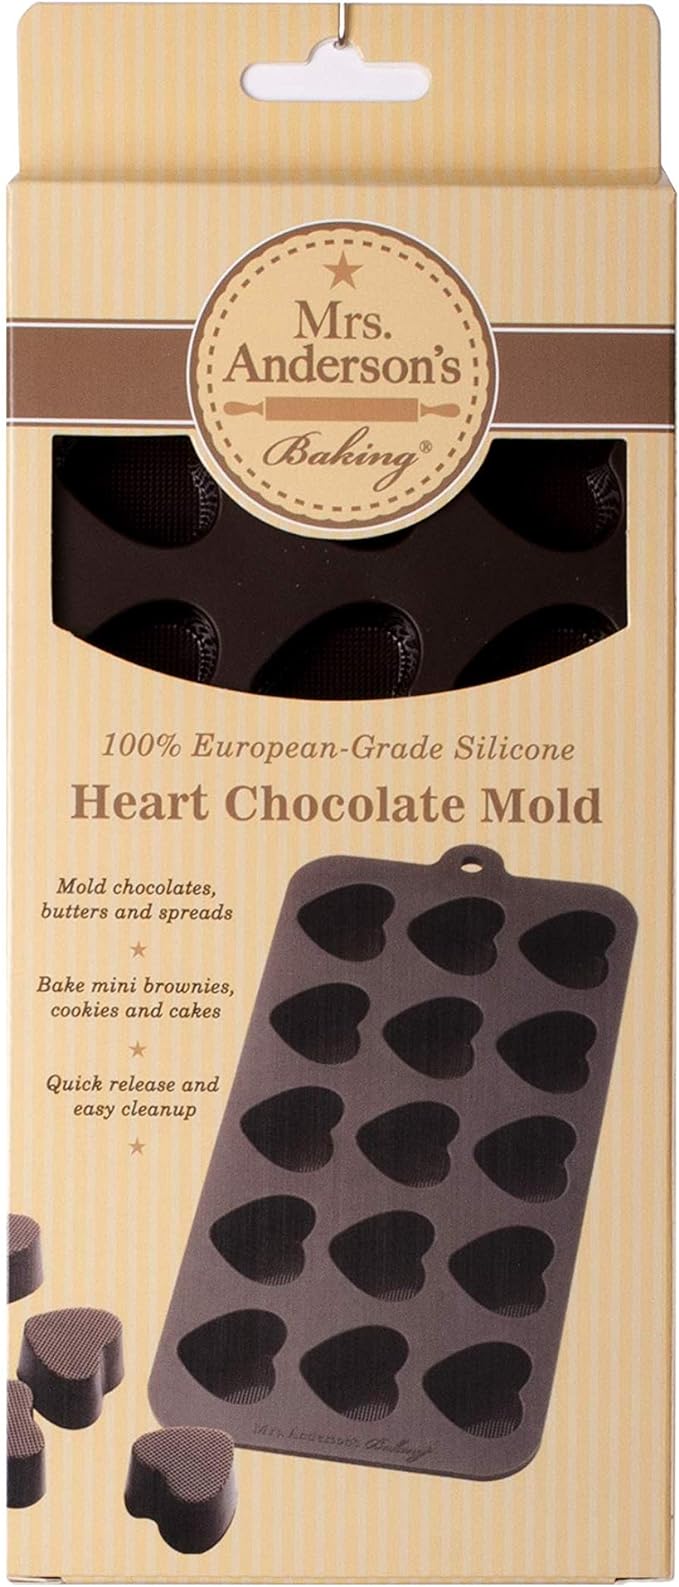 Mrs. Andersons Baking - Heart Chocolate Mold